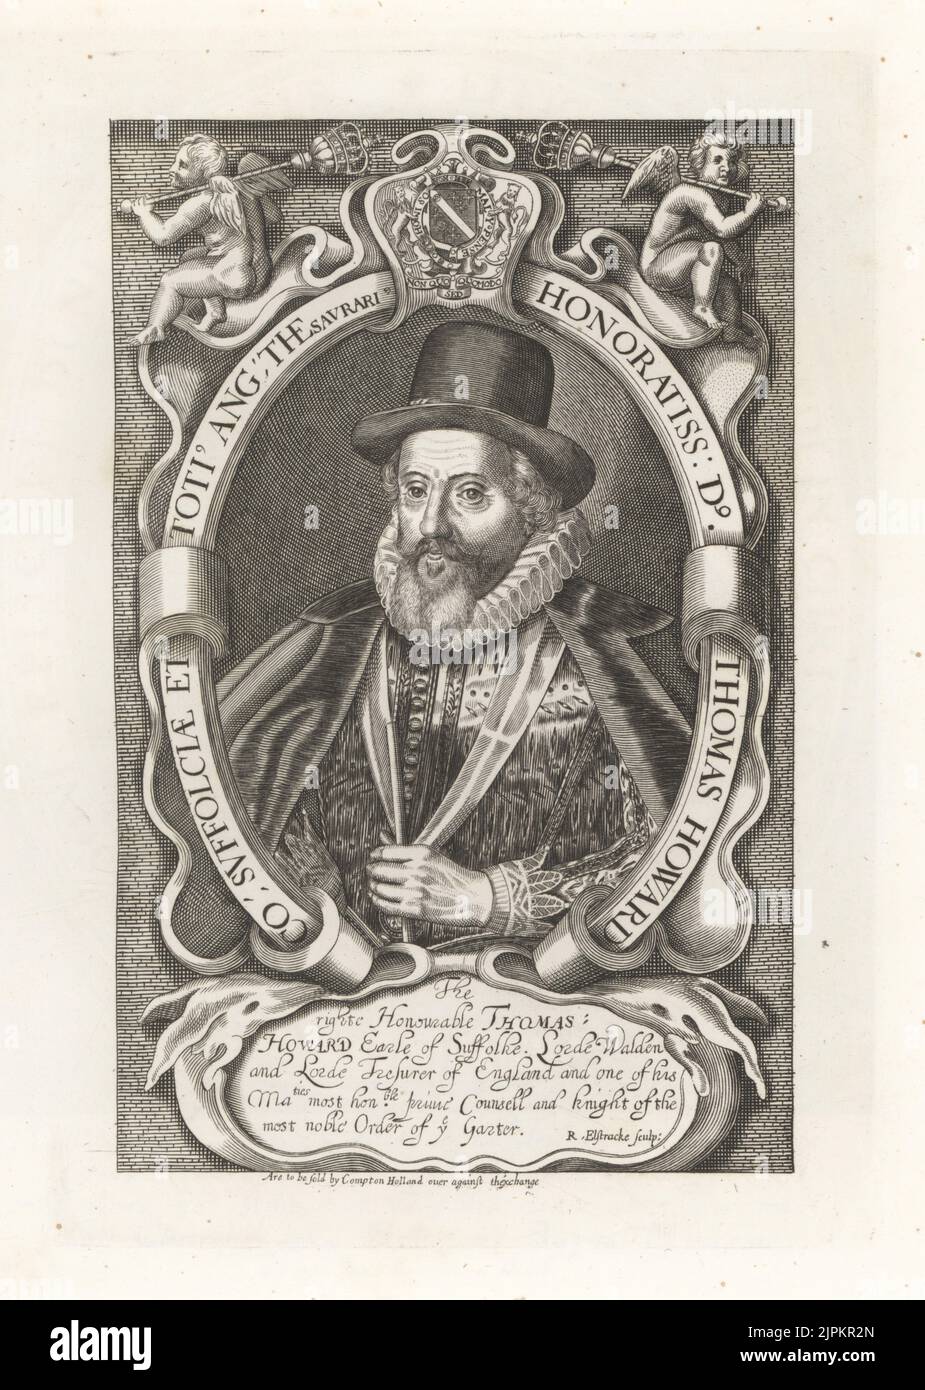 Thomas Howard, 1st Earl of Suffolk, 1561-1626. Lord Chamberlain, Lord High Treasurer of England to King James I, Knight of the Garter. In hat, ruff collar, doublet and cloak, holding a ribbon. Under coat of arms with two putti holding sceptres. Copperplate engraving after Renold Elstrack from Samuel Woodburn’s Gallery of Rare Portraits Consisting of Original Plates, George Jones, 102 St Martin’s Lane, London, 1816. Stock Photo